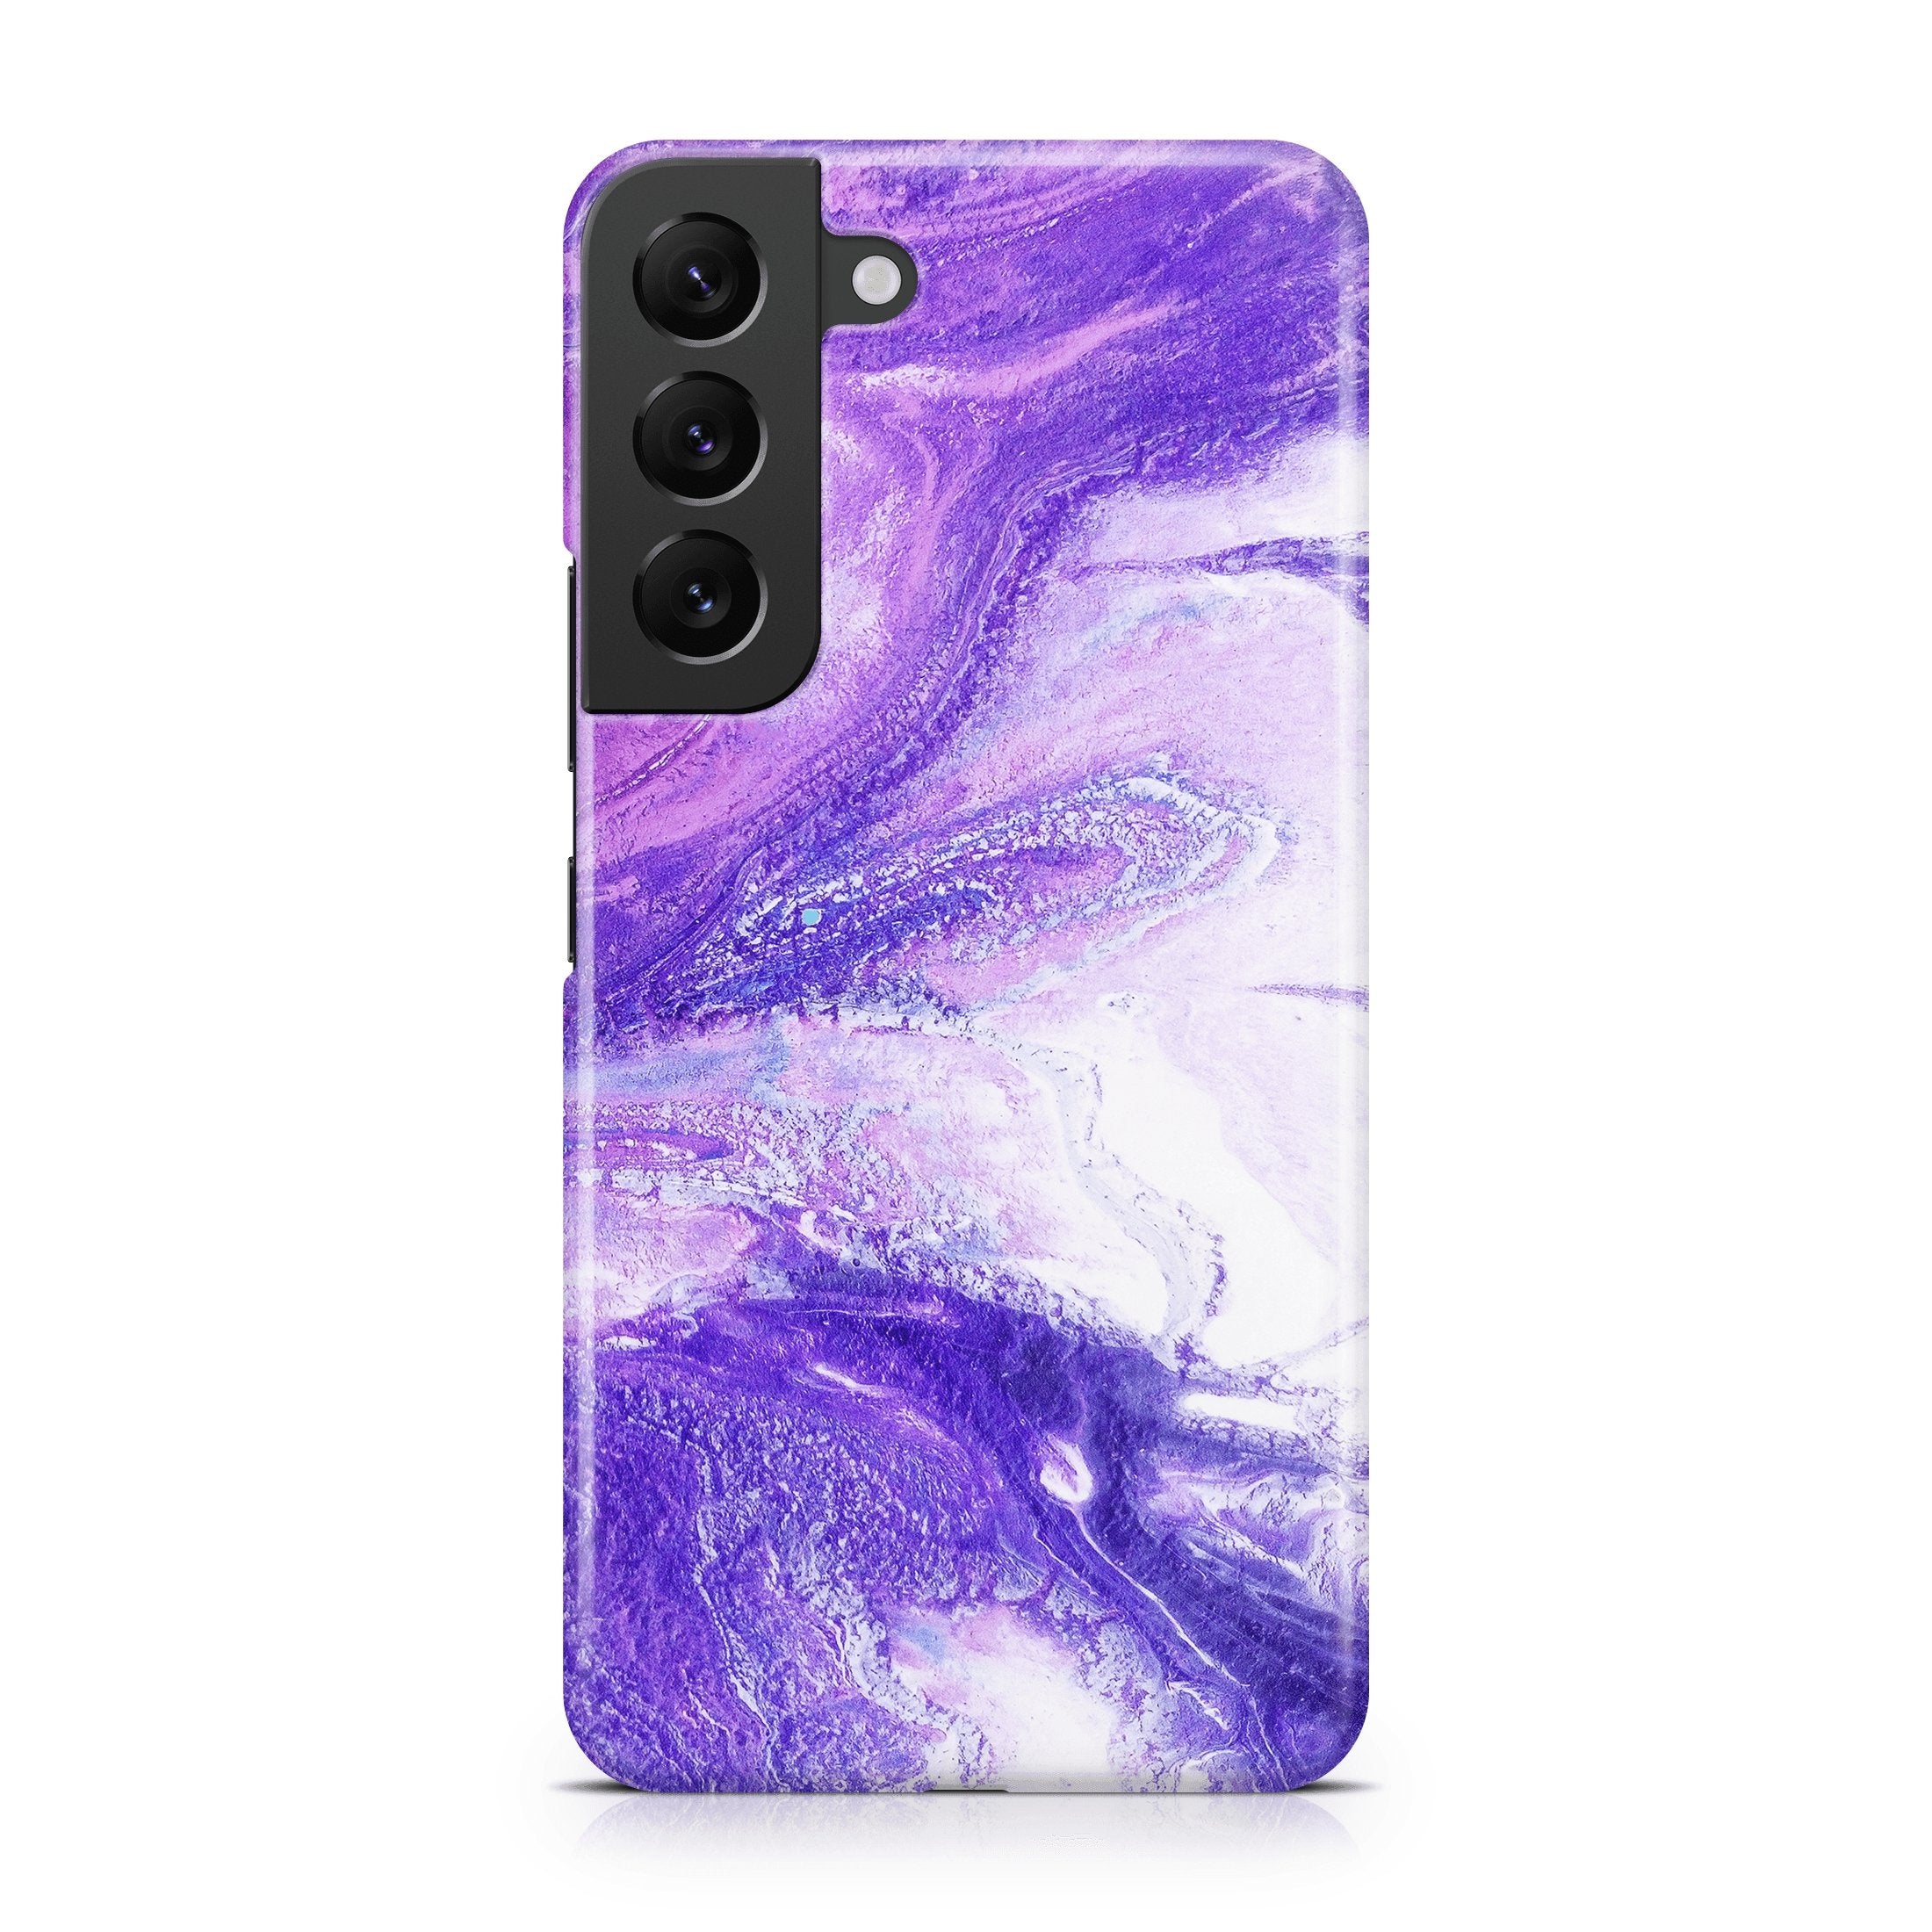 Ultra Violet Acrylic - Samsung phone case designs by CaseSwagger